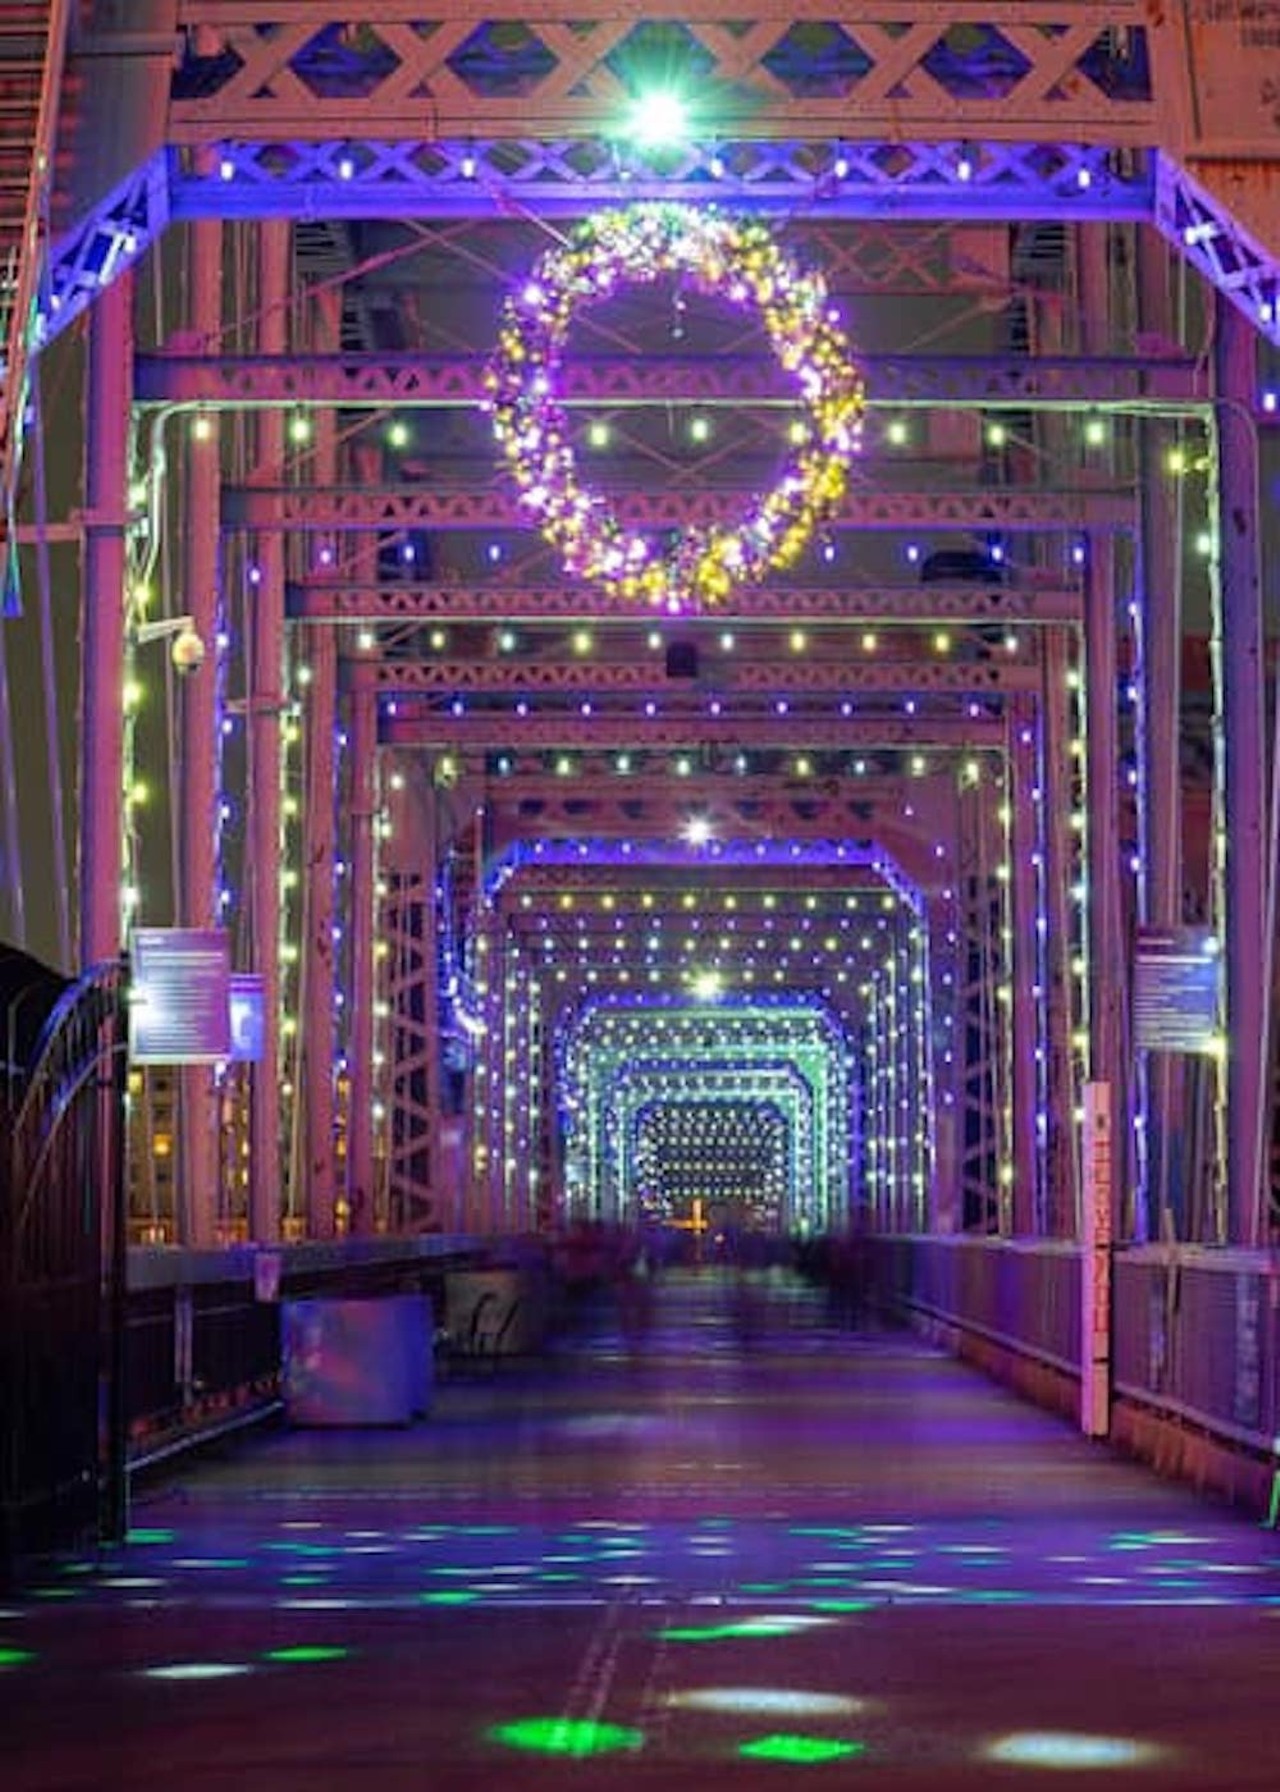 Winter Nights and River Lights
When: Nov. 17, 18 & 19
Where: Purple People Bridge
What: Festive light display
Who: Purple People Bridge
Why: City lights and bridge lights will make for a beautiful holiday display and evening activity.